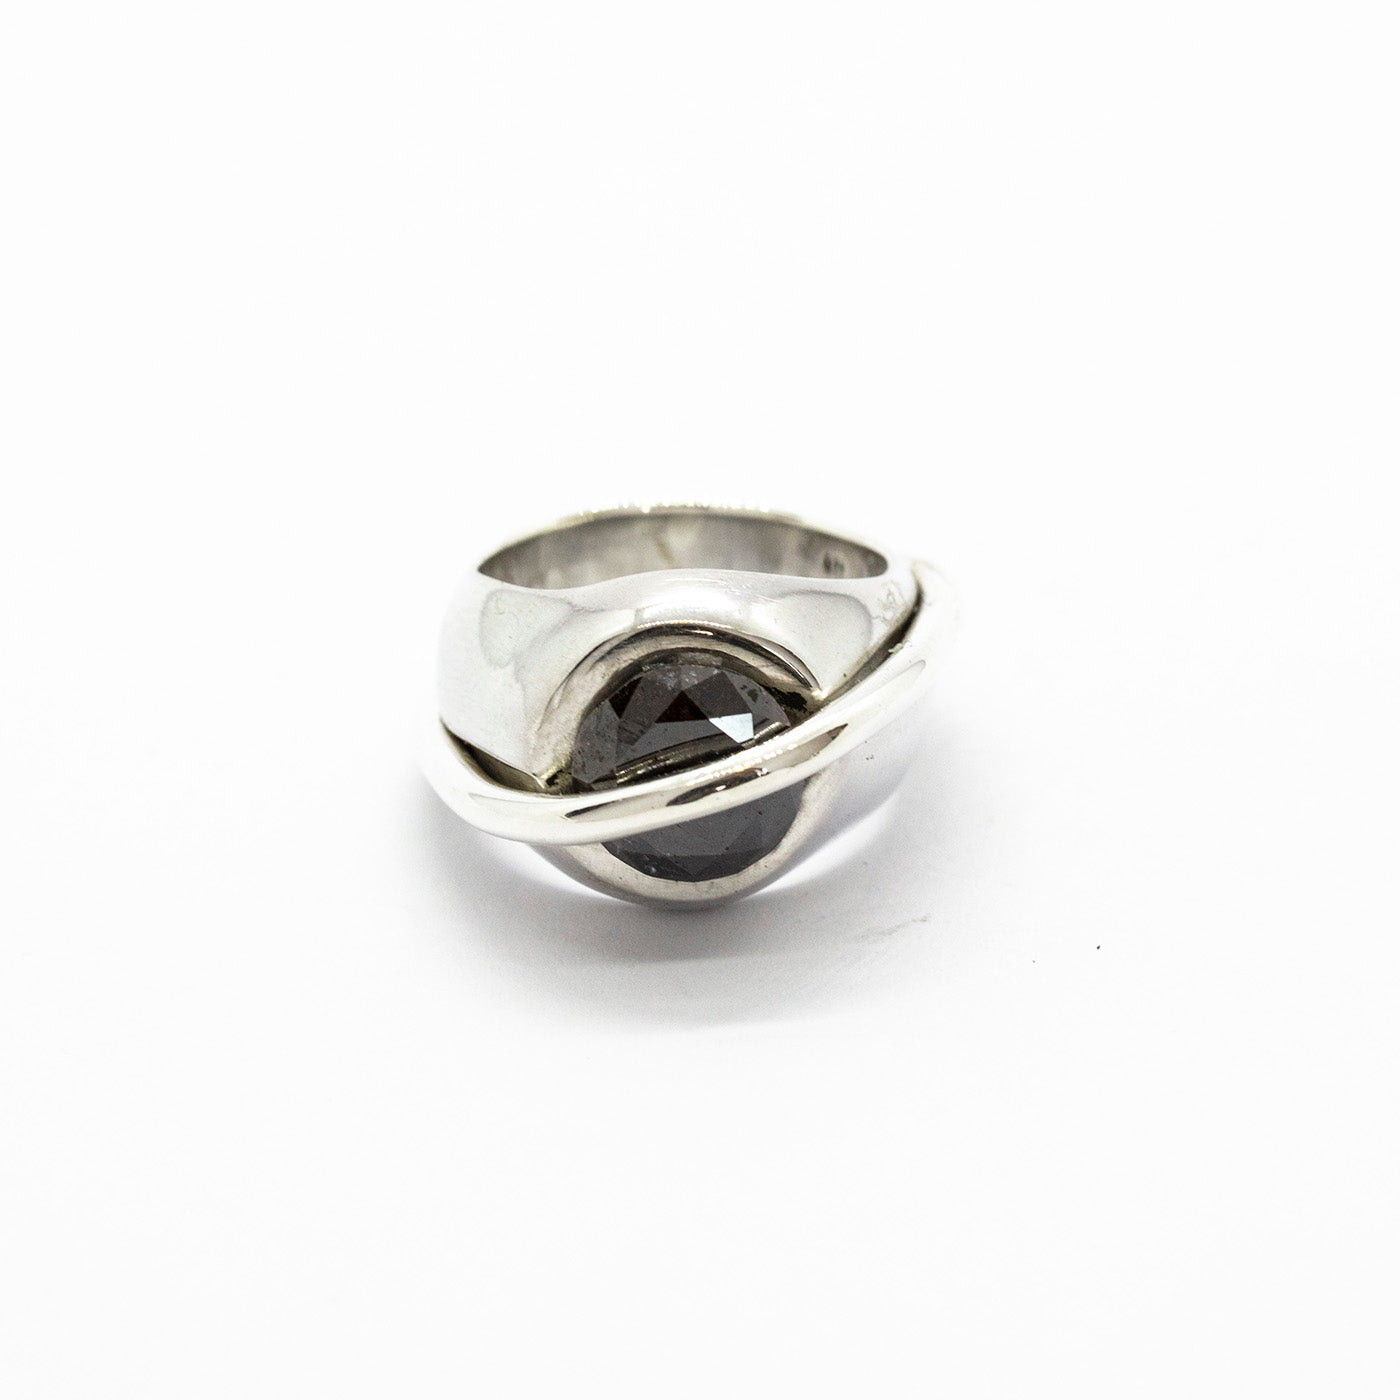 Chaotic Signet ring front view silver 3,47ct deep mahogany diamond innan jewellery independent atelier berlin